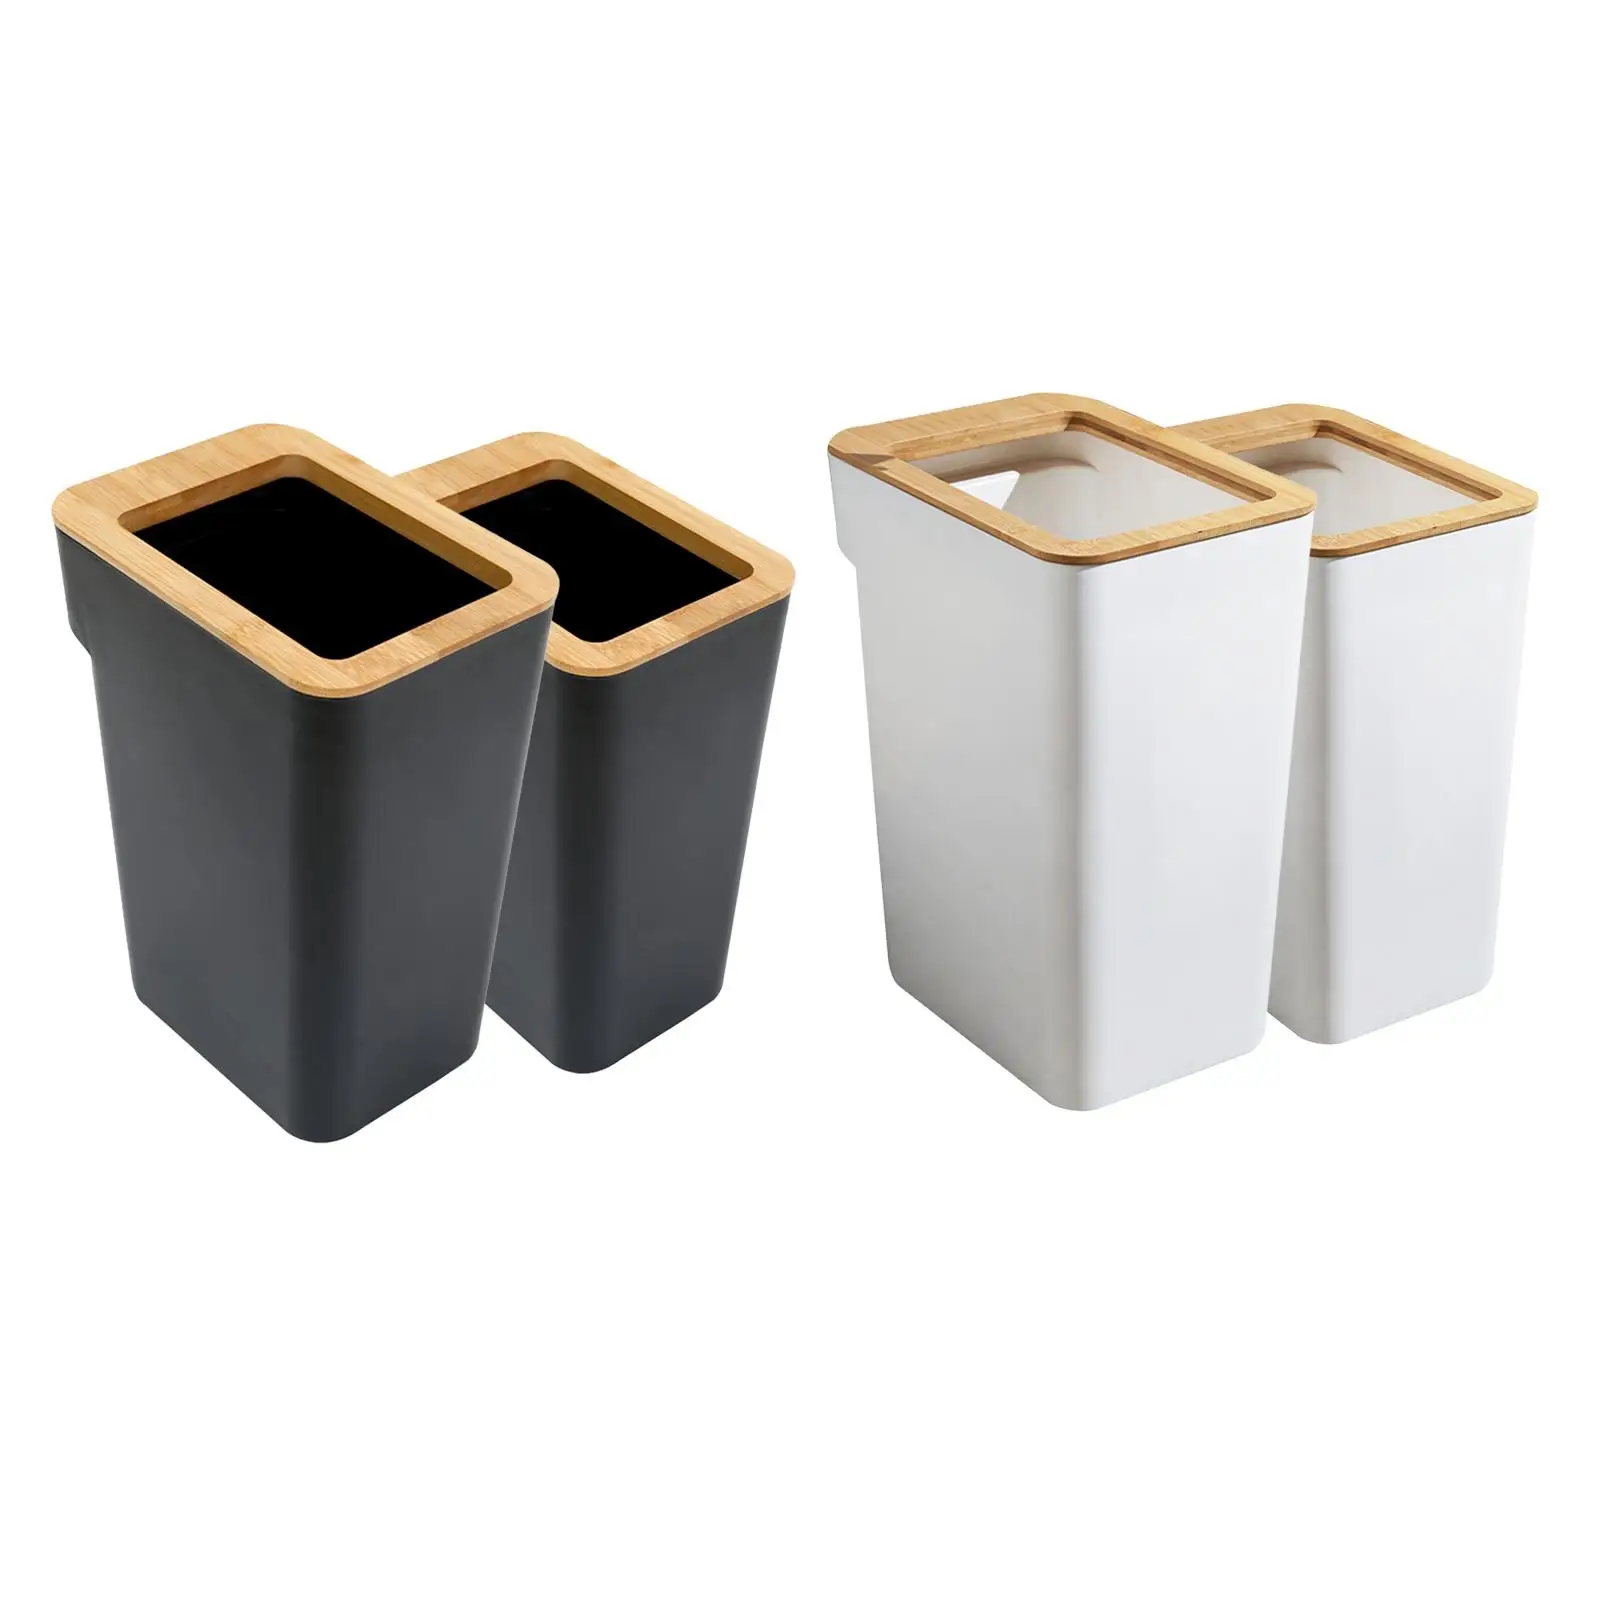 Small Garbage Can,Dumpster,Trash Can,Waste Bin,Trash Can,Bucket for Kitchen,Bathroom,Home,Living Room,Laundry Room